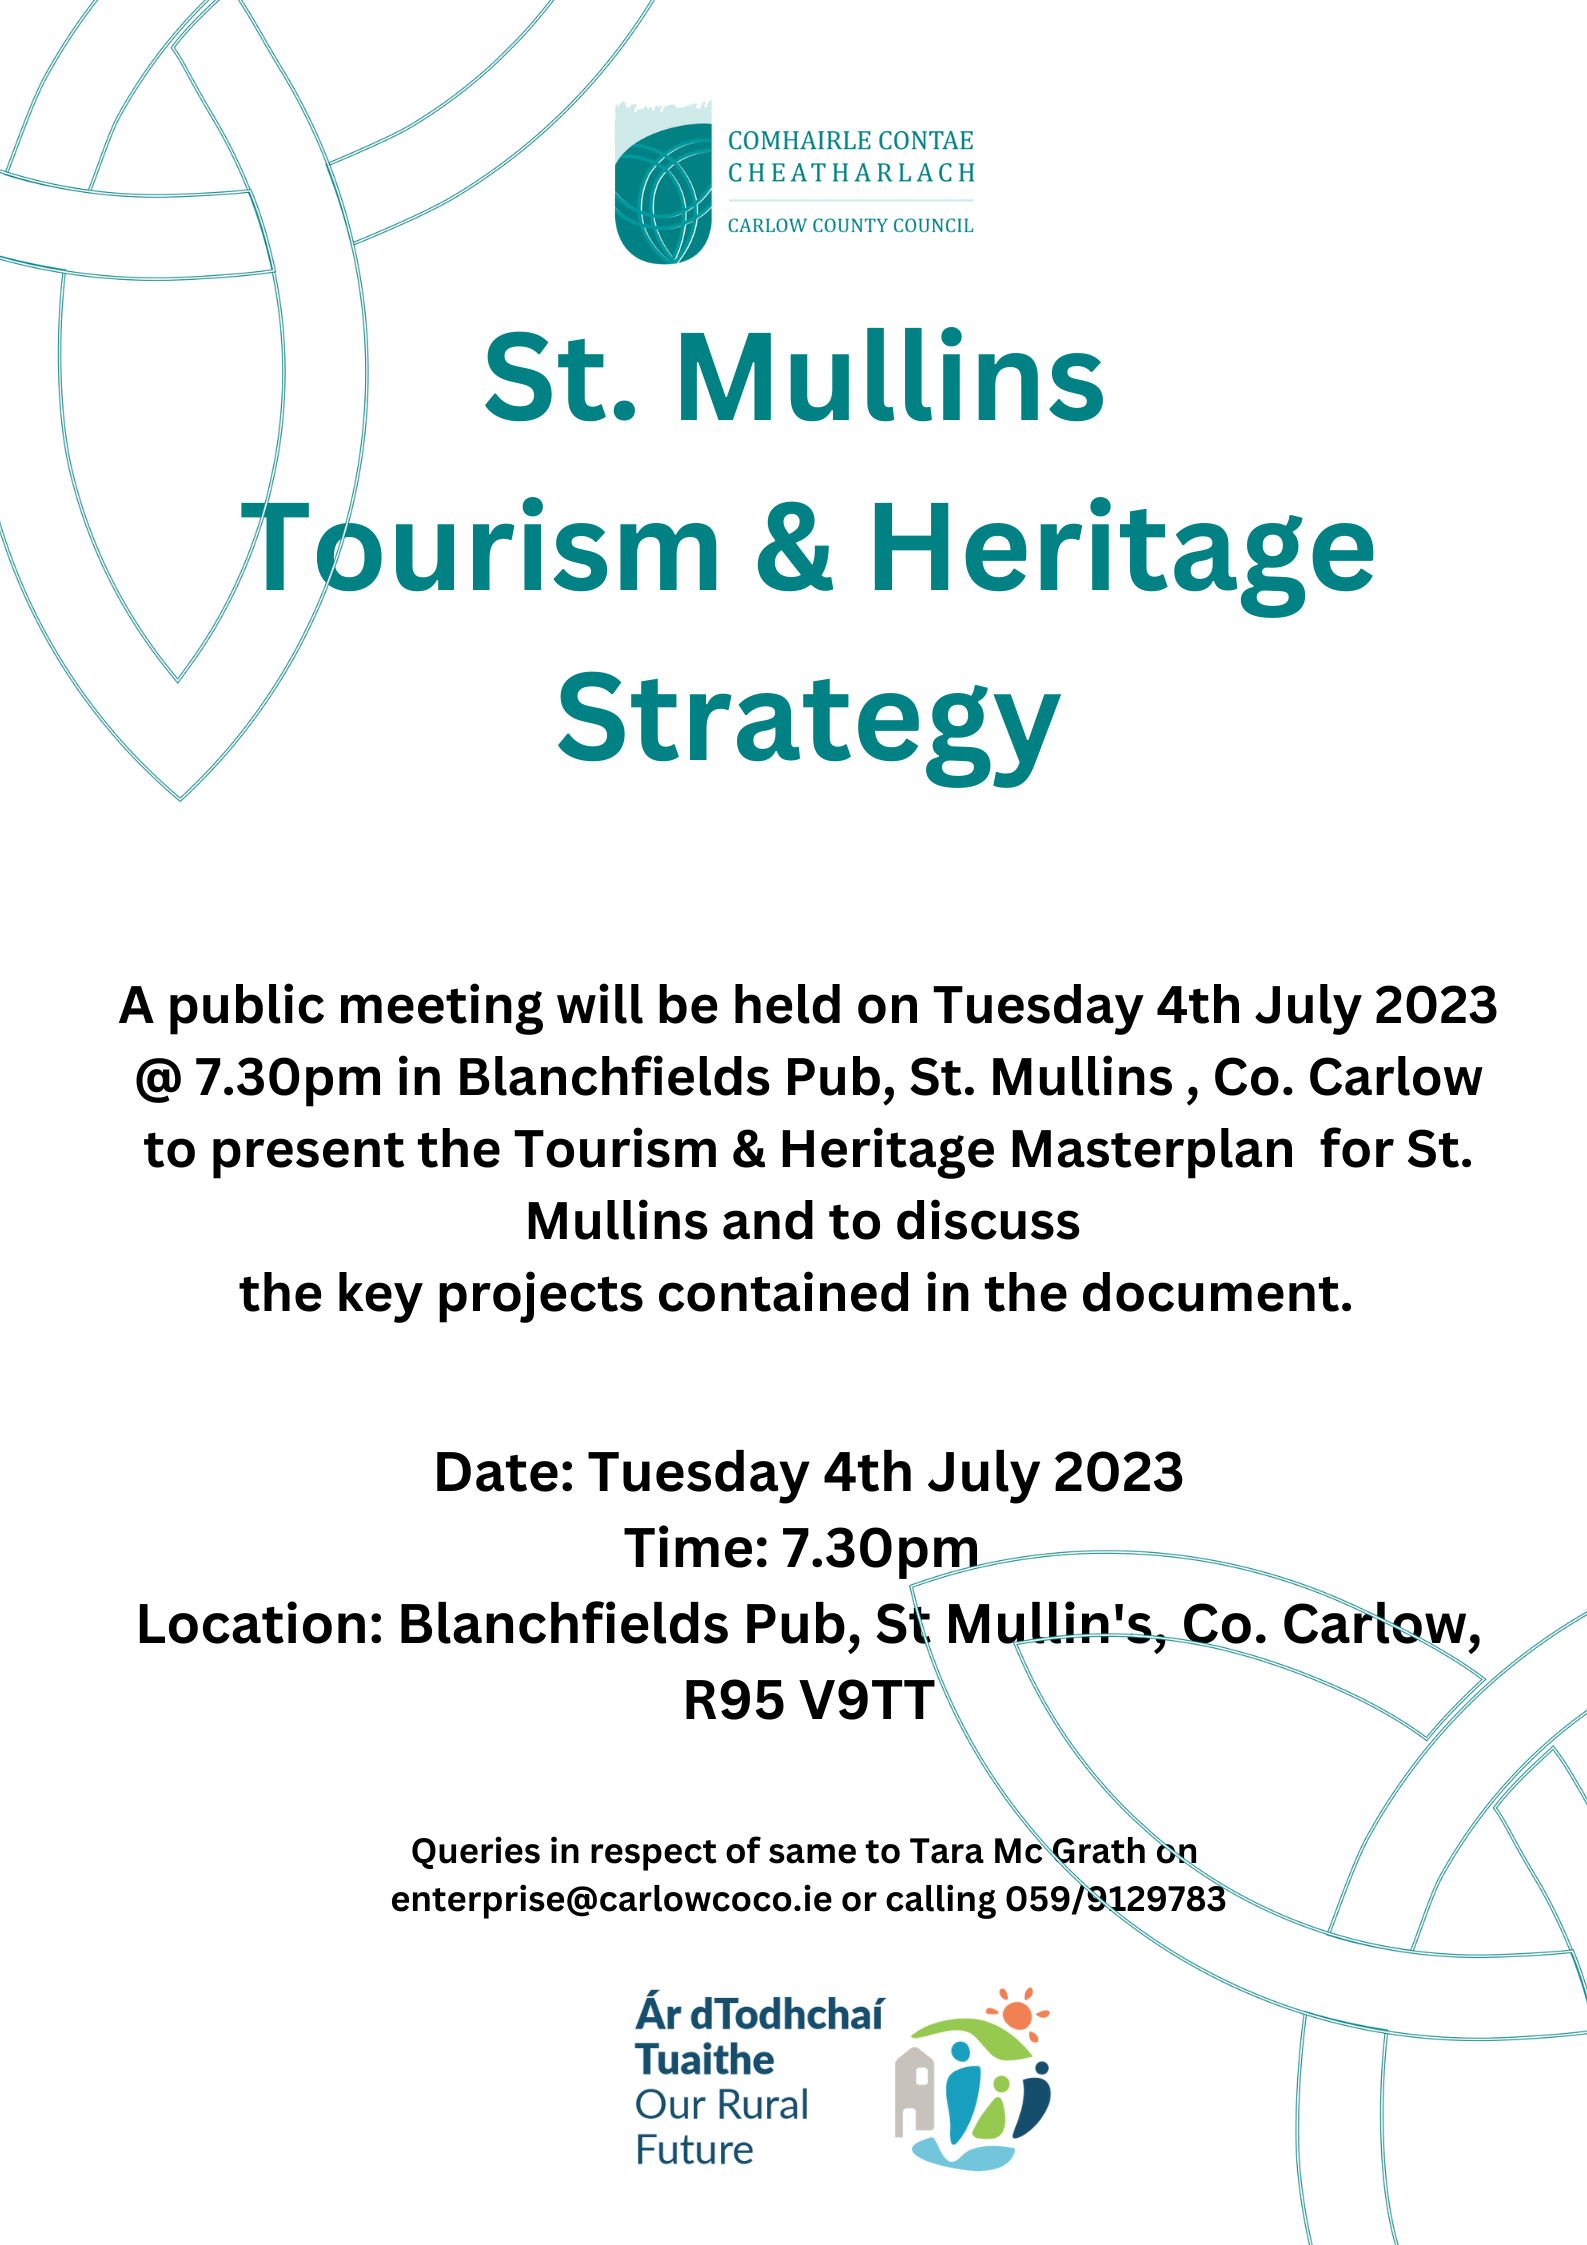 St Mullins - Tourism & Heritage Strategy